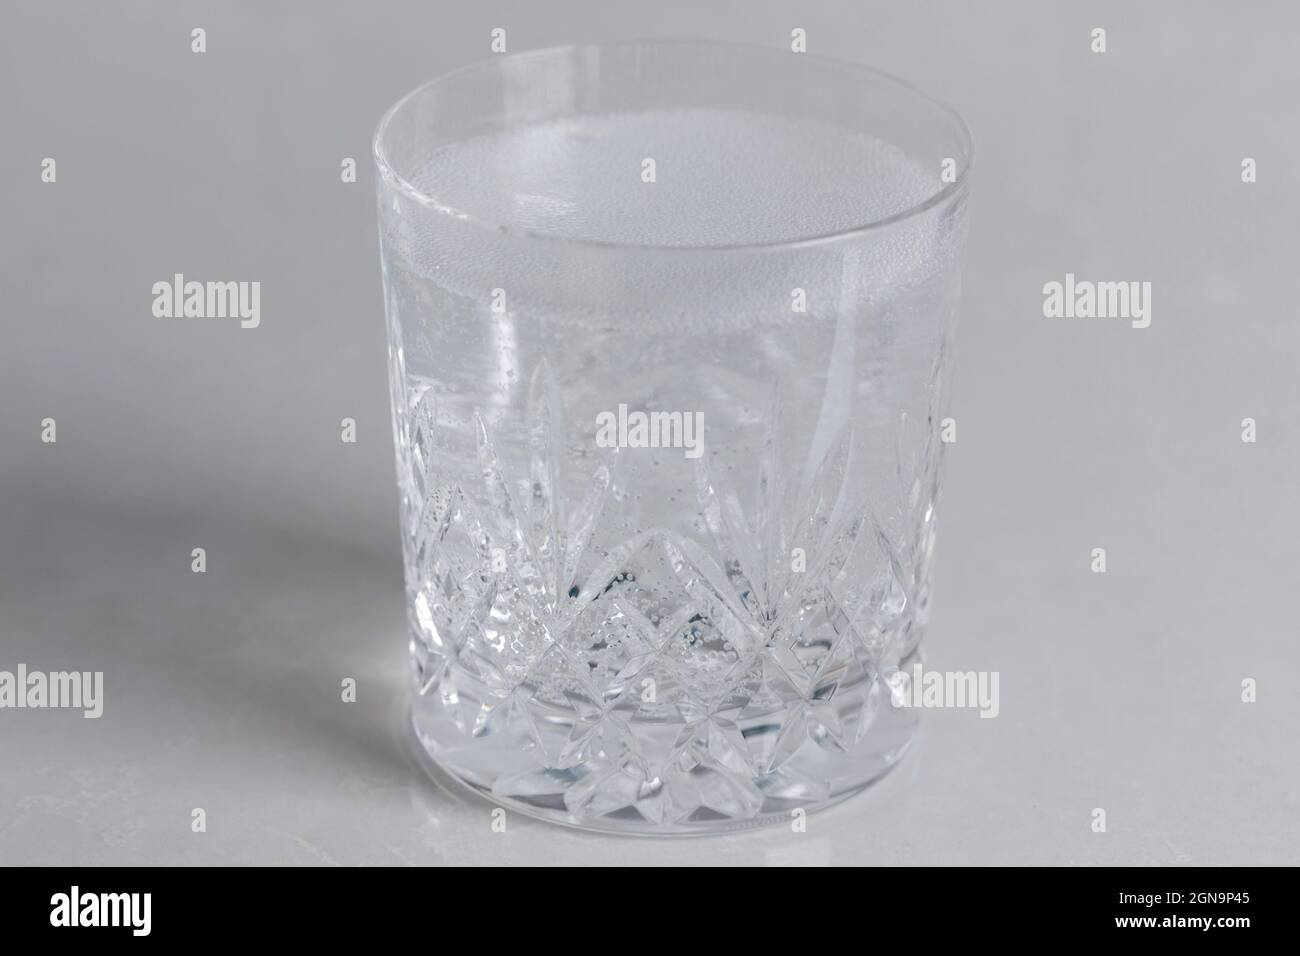 a finely cut crystal tumbler or shot glass filled with sparkling water with a layer of fizz or foam on top on a white background with natural lighting Stock Photo